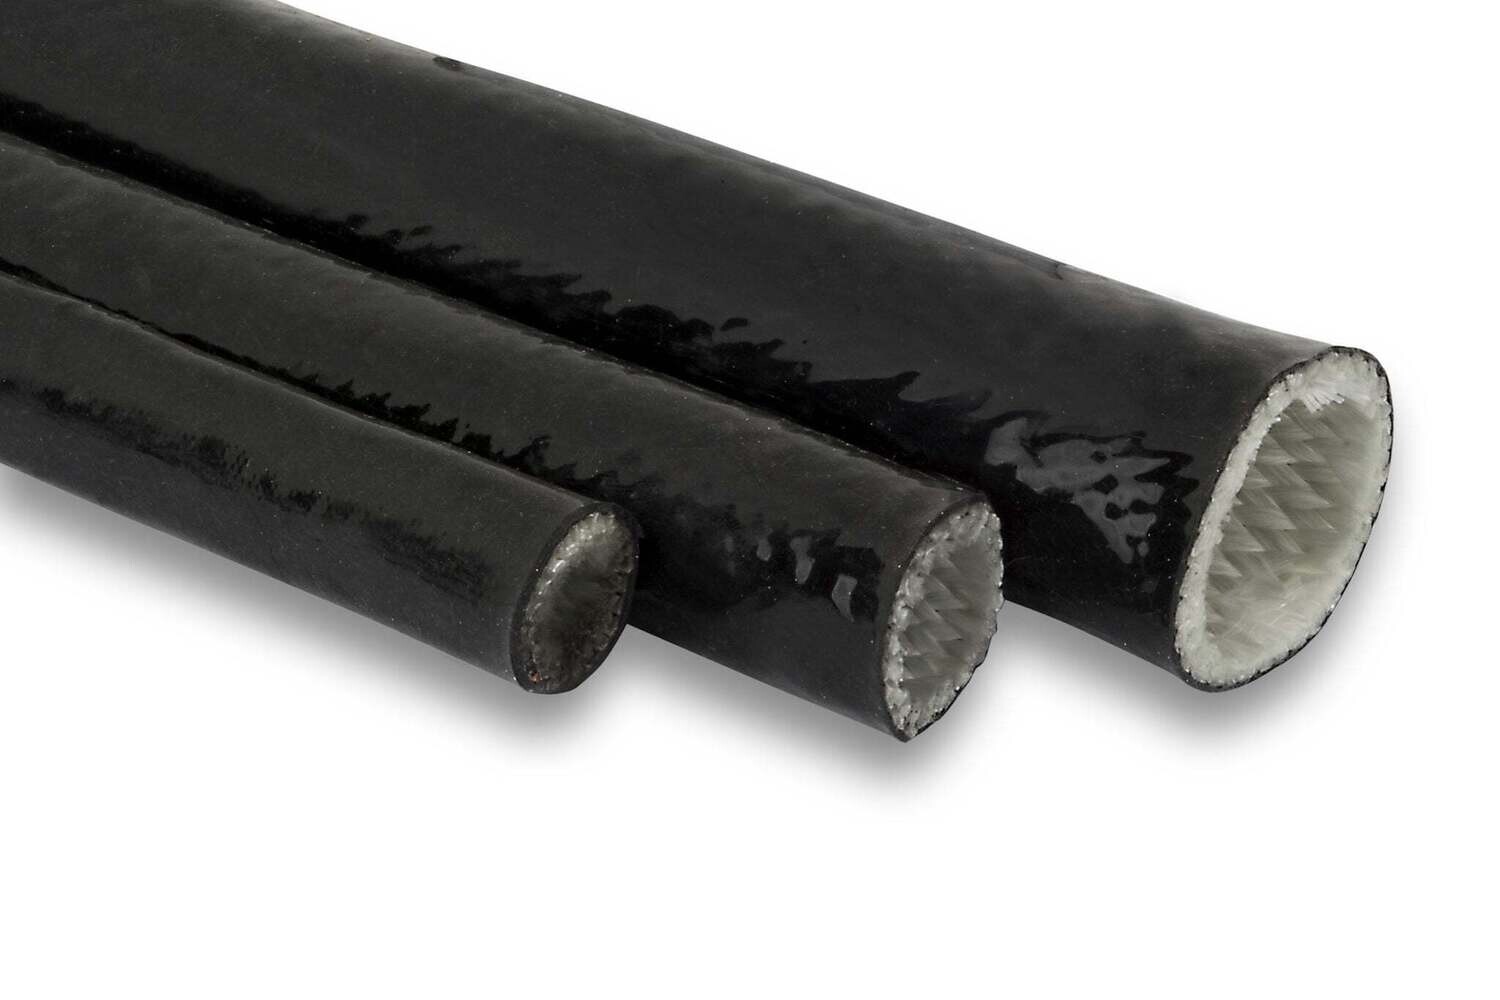 Black Silicon High Heat Sleeve - 35mm, 1.0m Multiple Qty will come on a continuous Roll